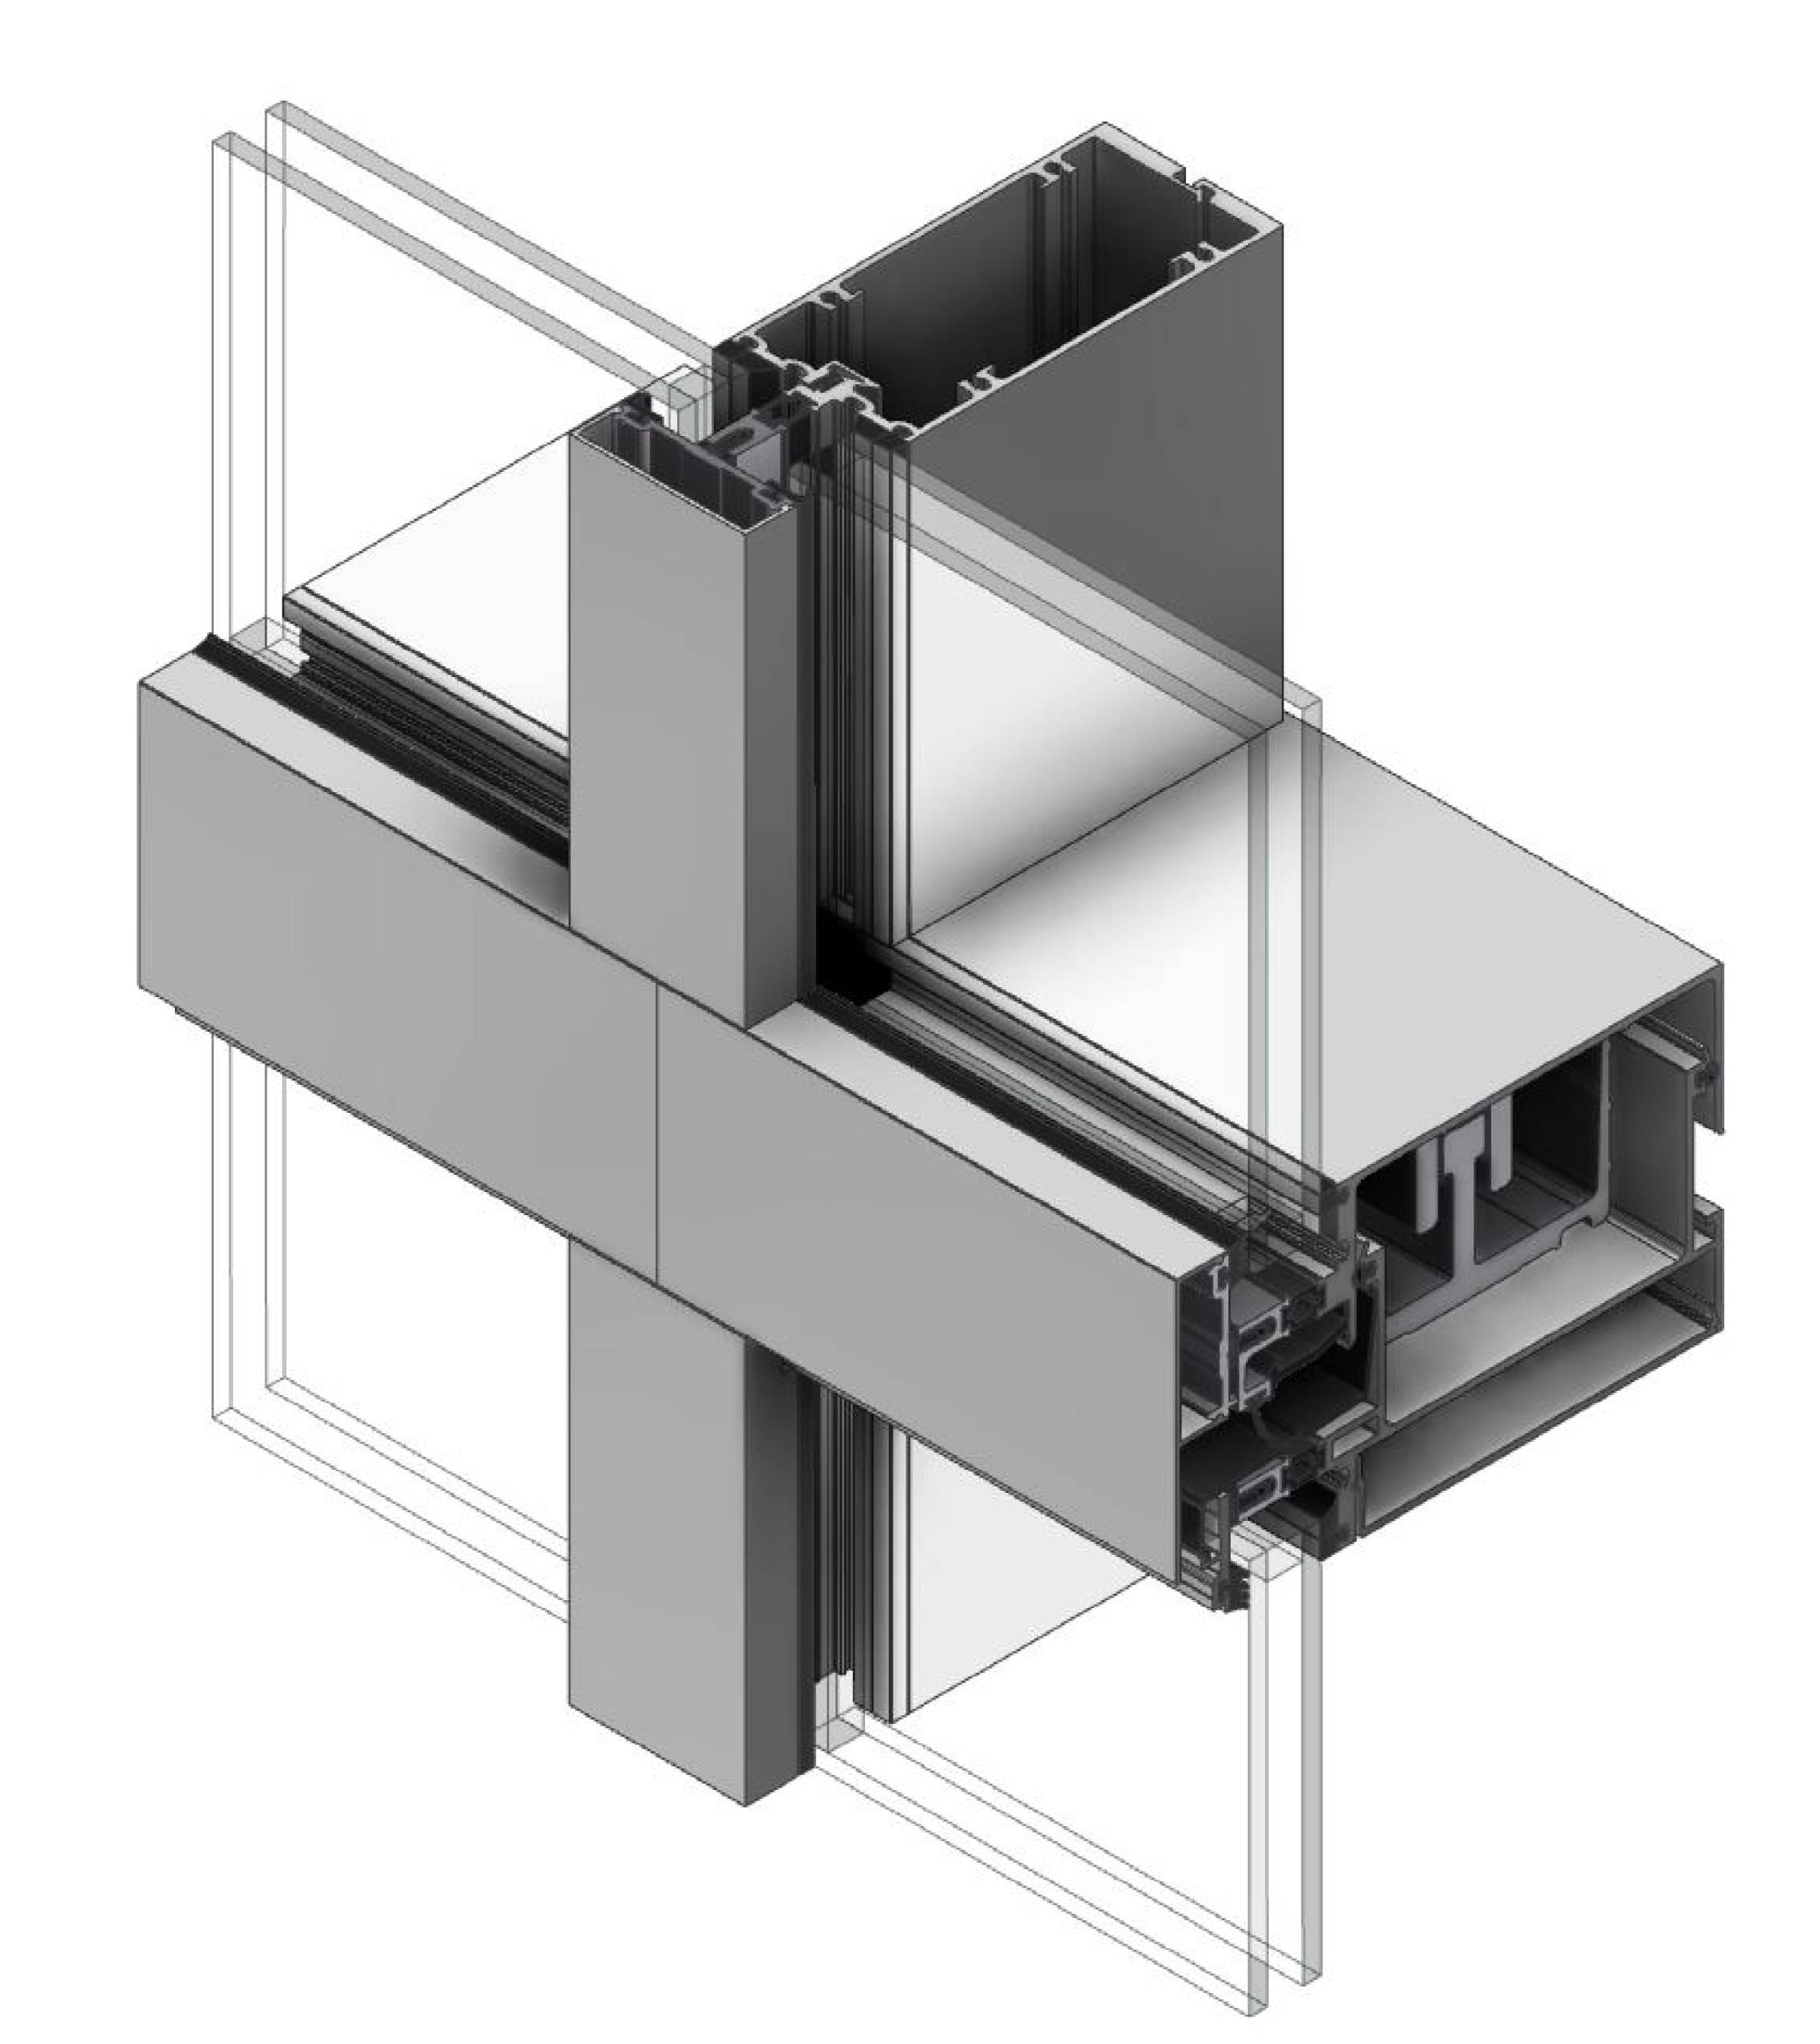 XTRM2600 Double Glazed Capped Stack Joint extrusion | XTRM2600 Extrusion de joint de cheminée à double vitrage coiffé